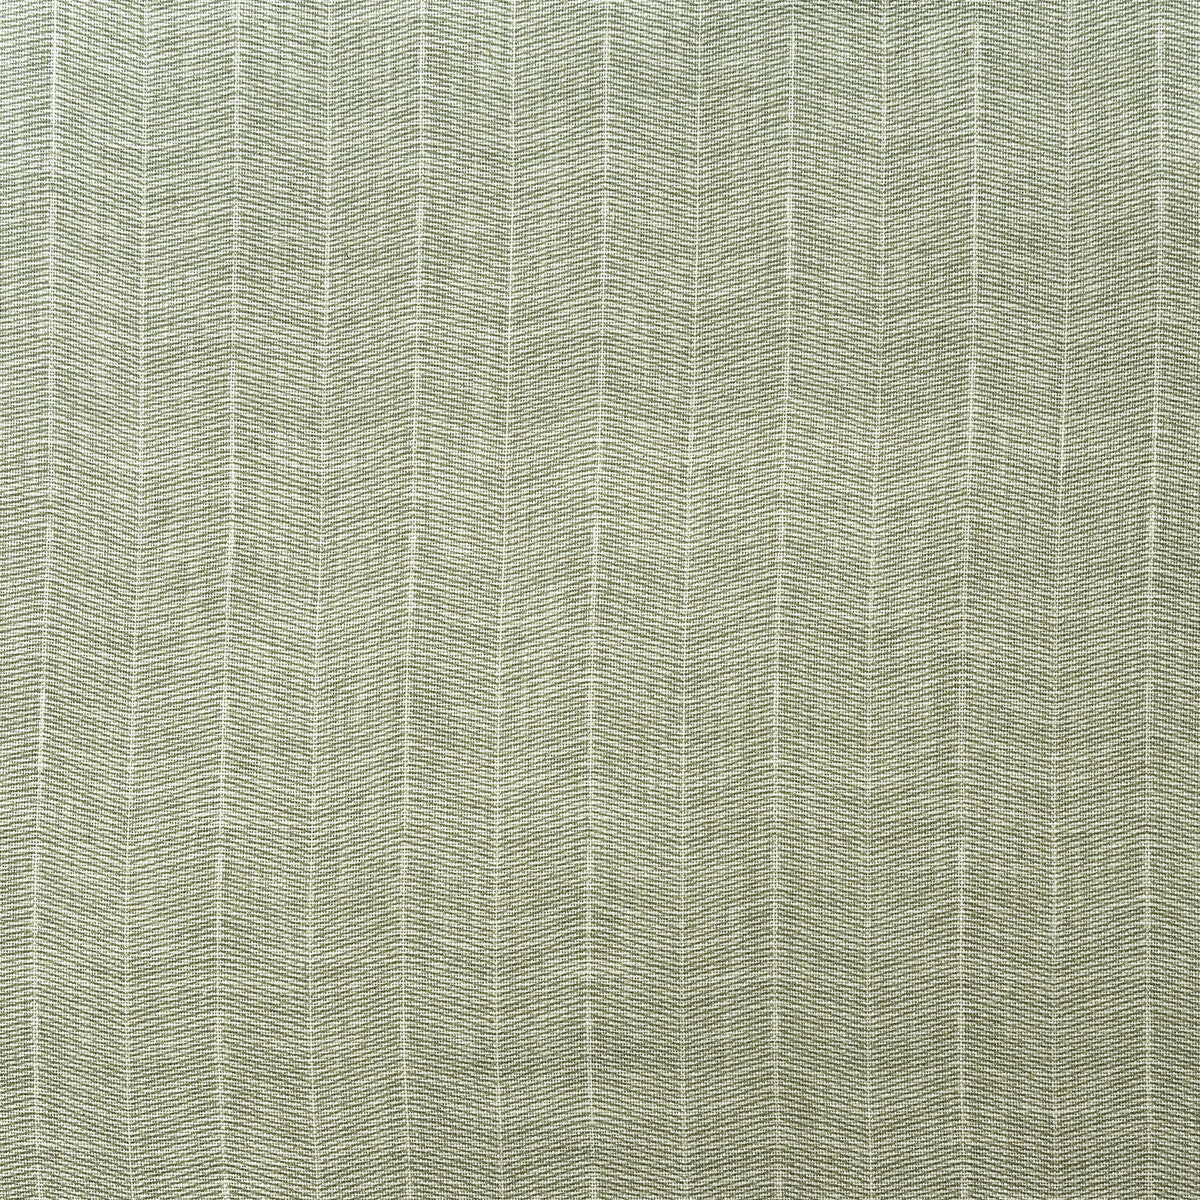 Furrow fabric in fennel color - pattern AM100380.123.0 - by Kravet Couture in the Andrew Martin Garden Path collection